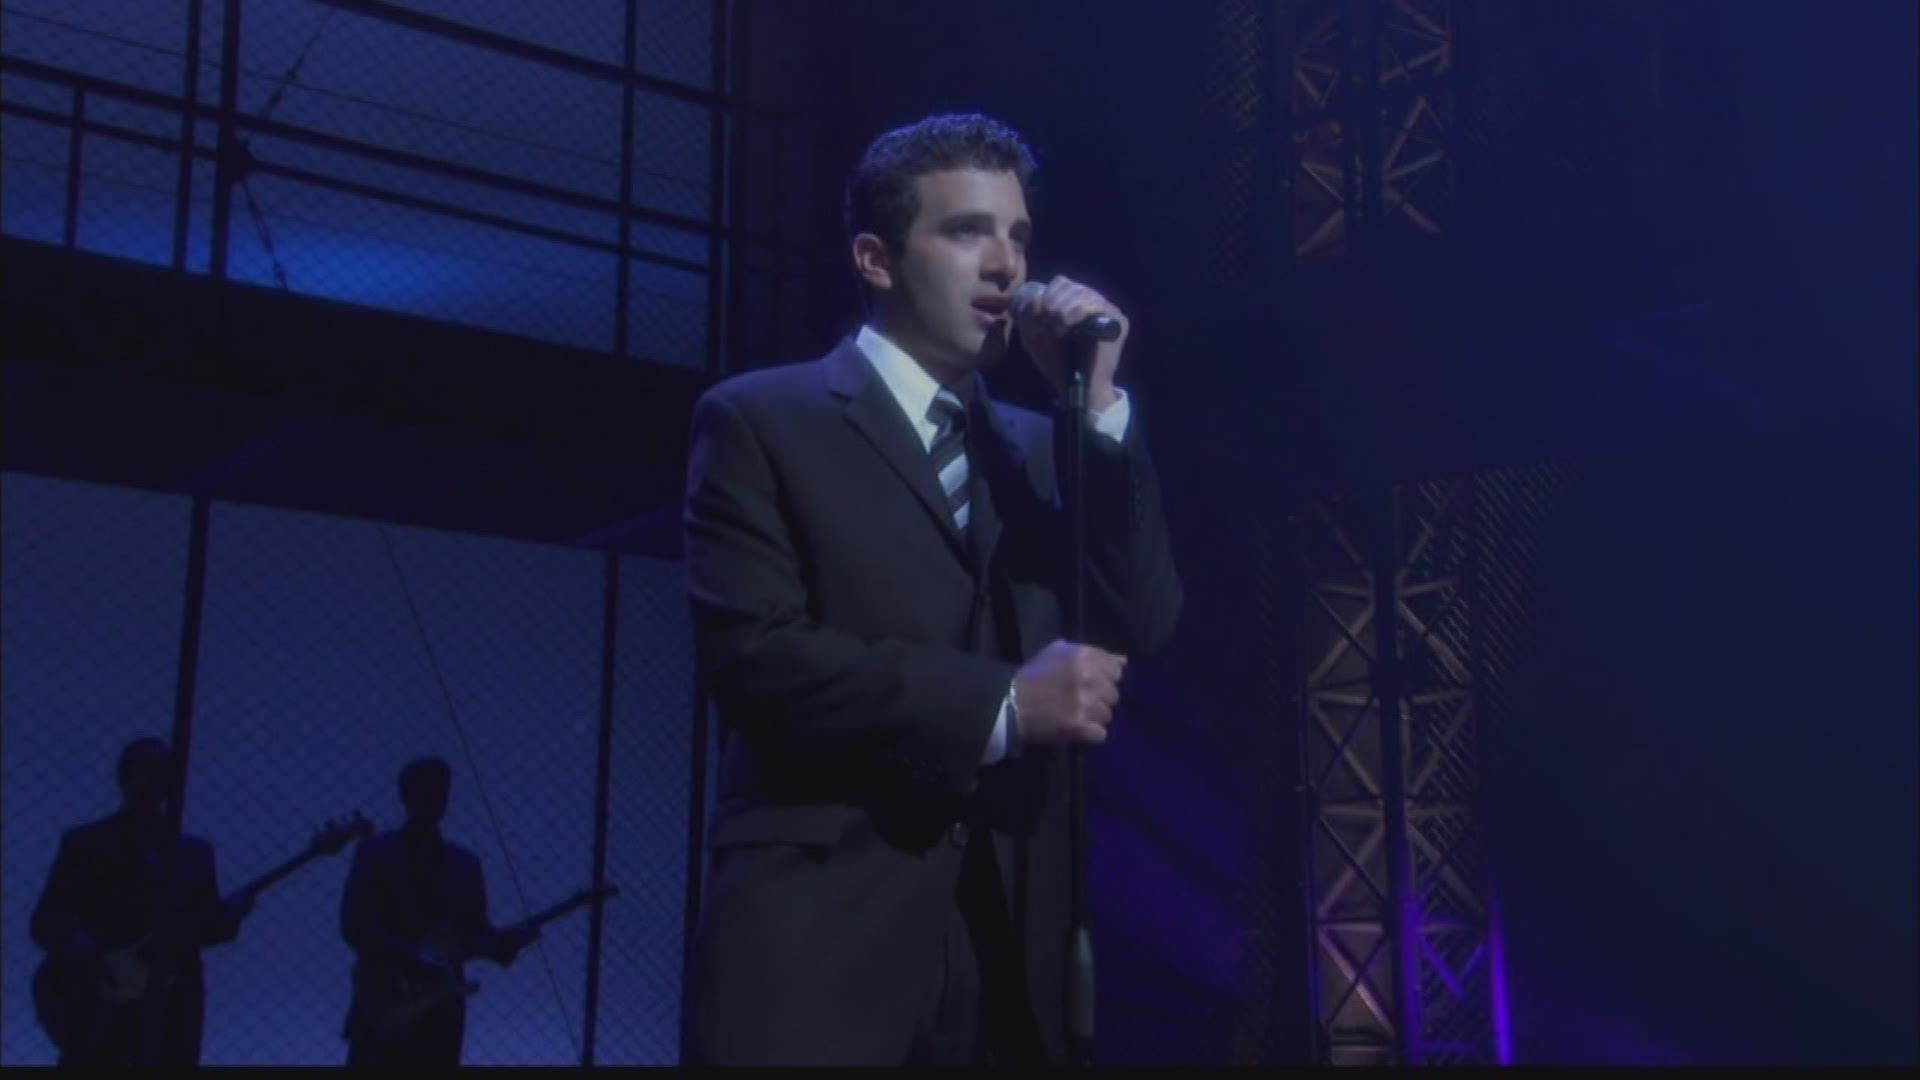 Jonny Morrow from Gorham is touring the country as a cast member of the musical Jersey Boys